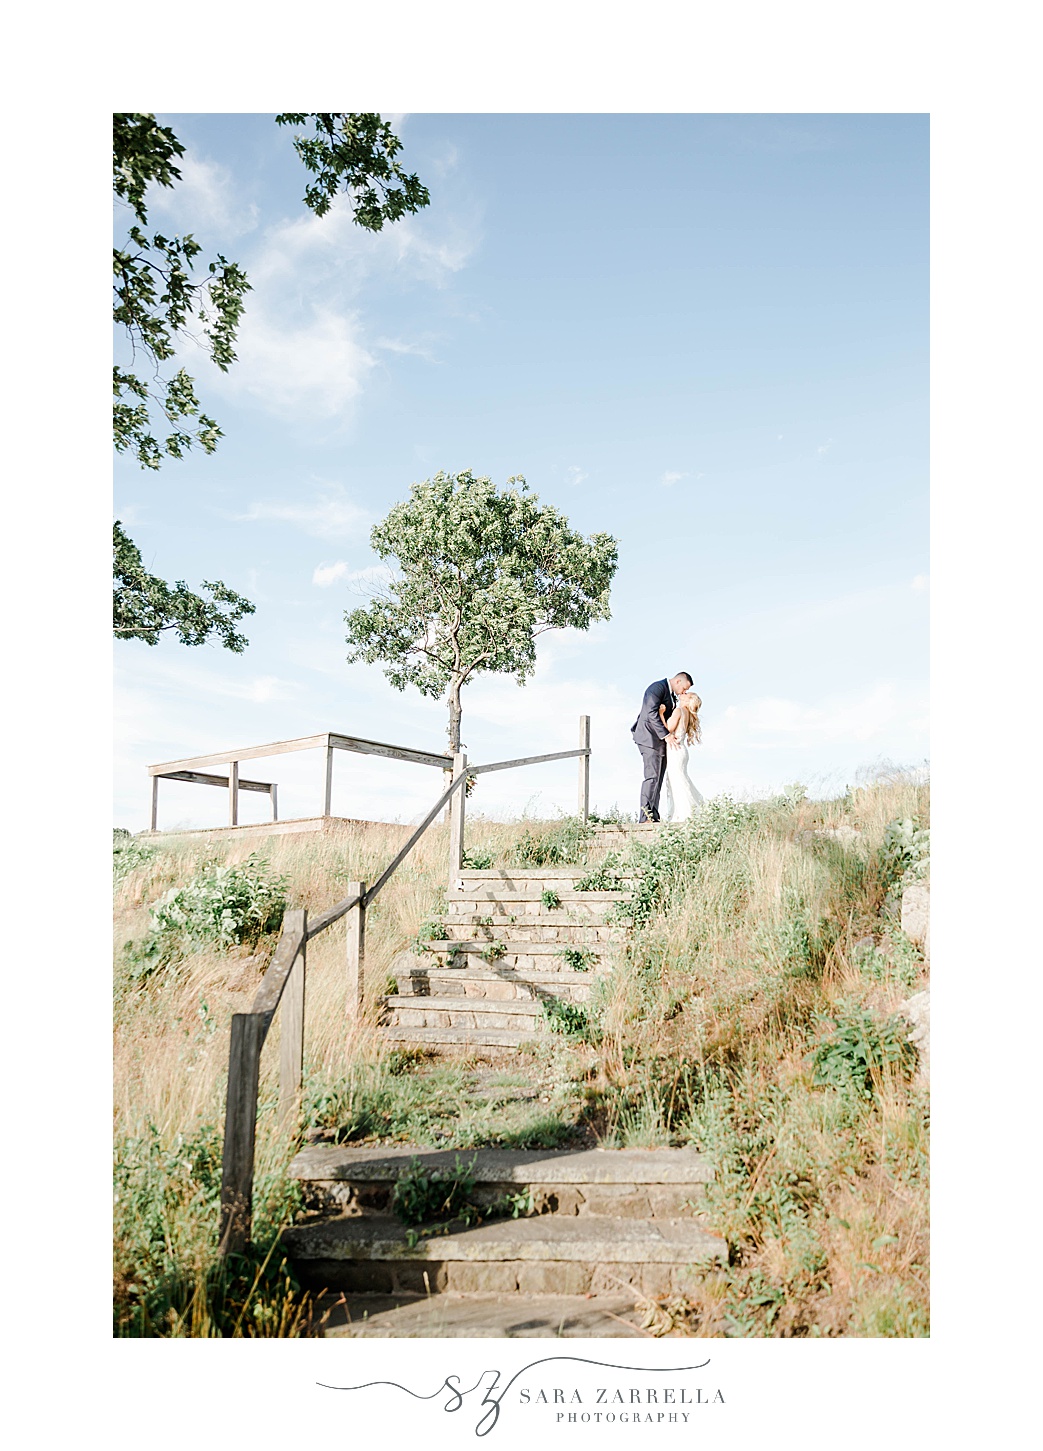 bride and groom kiss at top of hill against blue sky